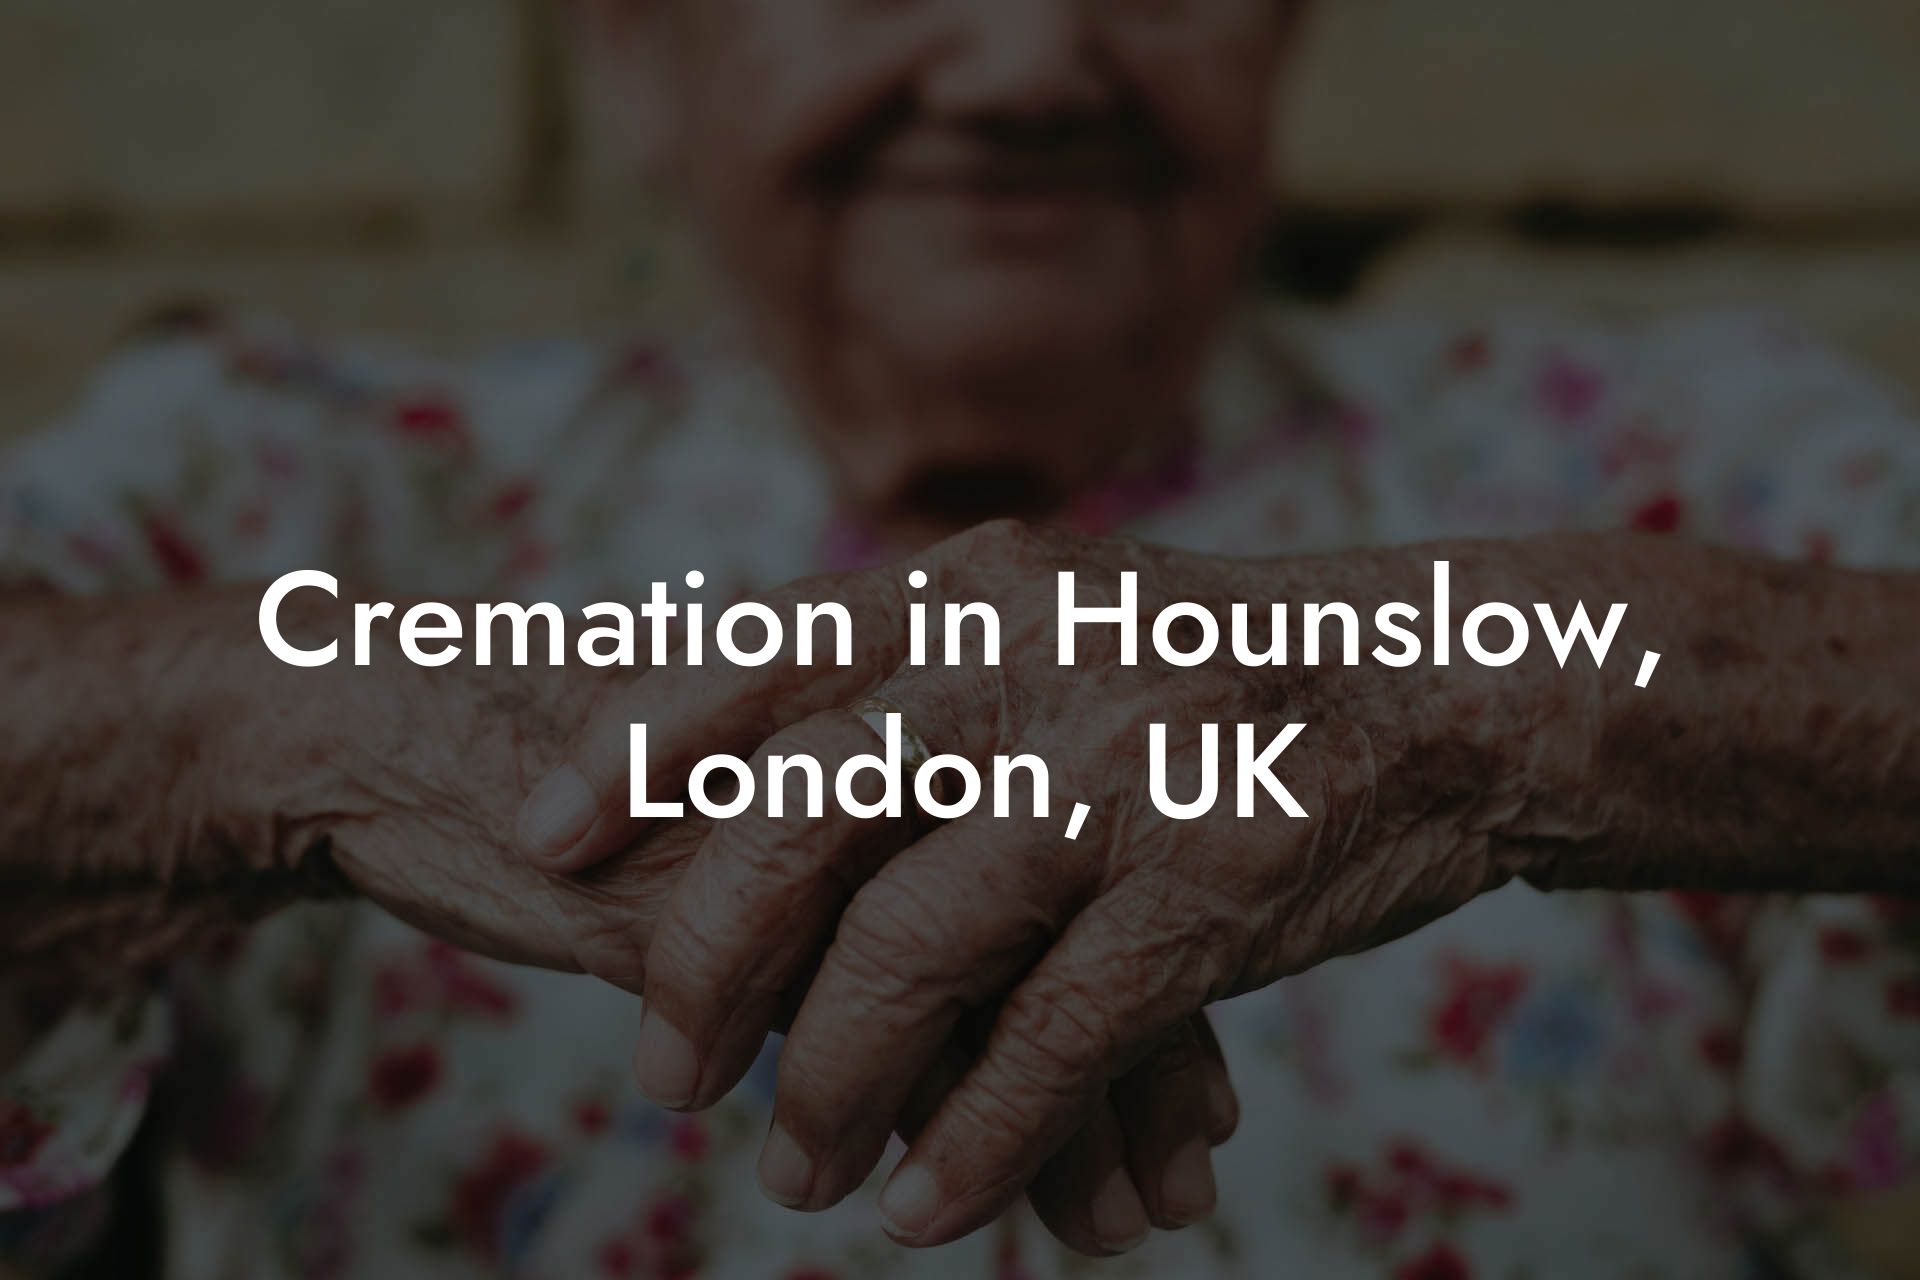 Cremation in Hounslow, London, UK